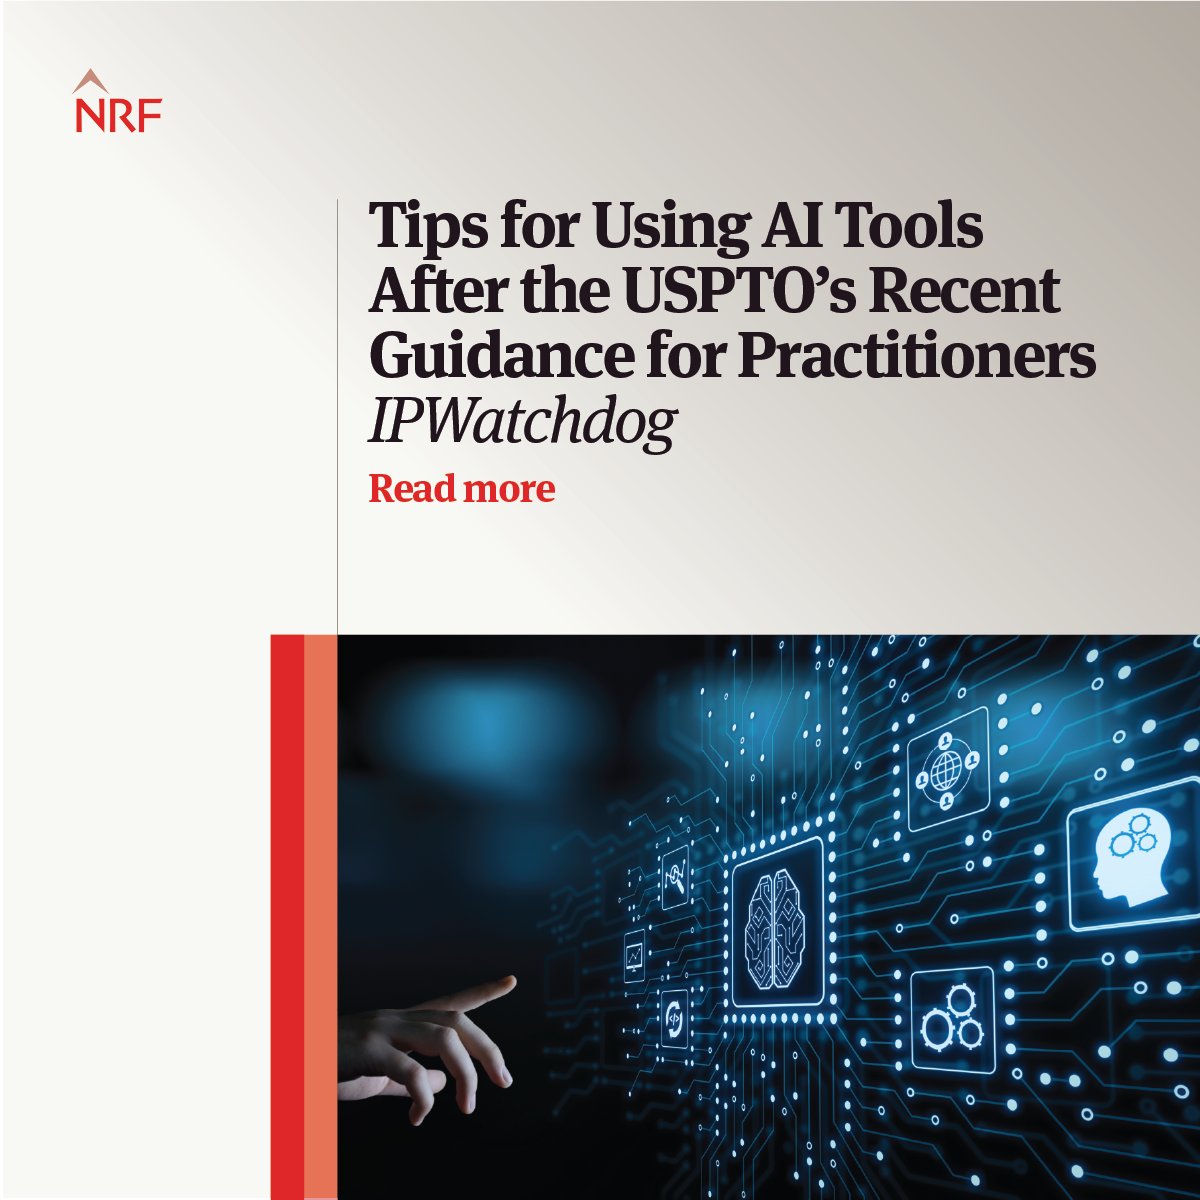 Darren Smith and Michael Mudrow discuss tips for using AI tools after the USPTO’s recent guidance to practitioners for IPWatchdog, Inc. Learn more about their thoughts on using AI tools in patent practice here: ow.ly/TfM650RC9HH